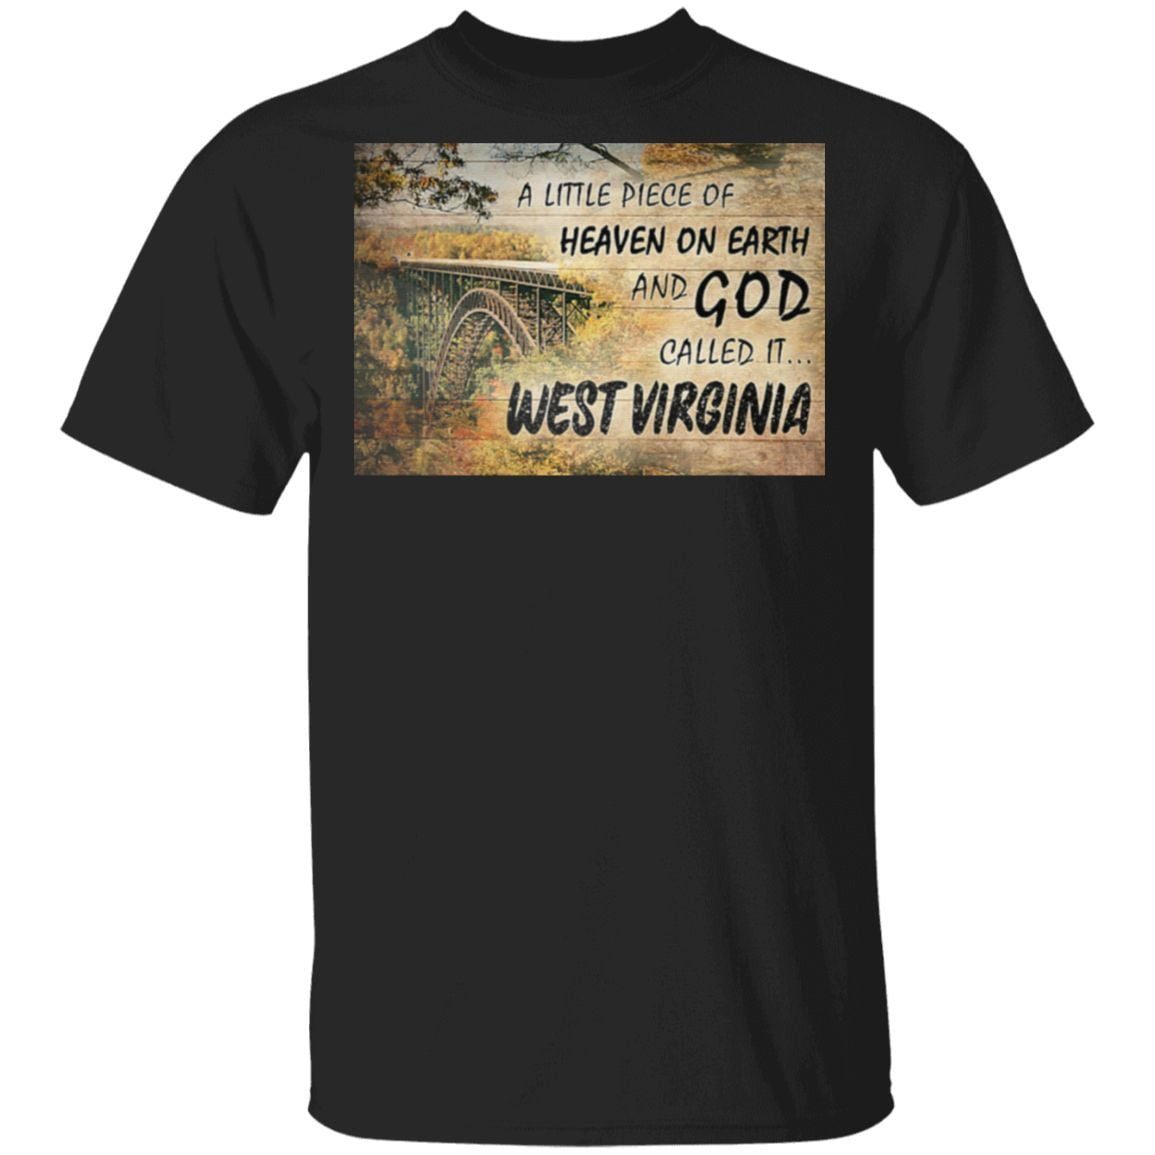 A little piece of heaven on earth and god called it West virginia t shirt